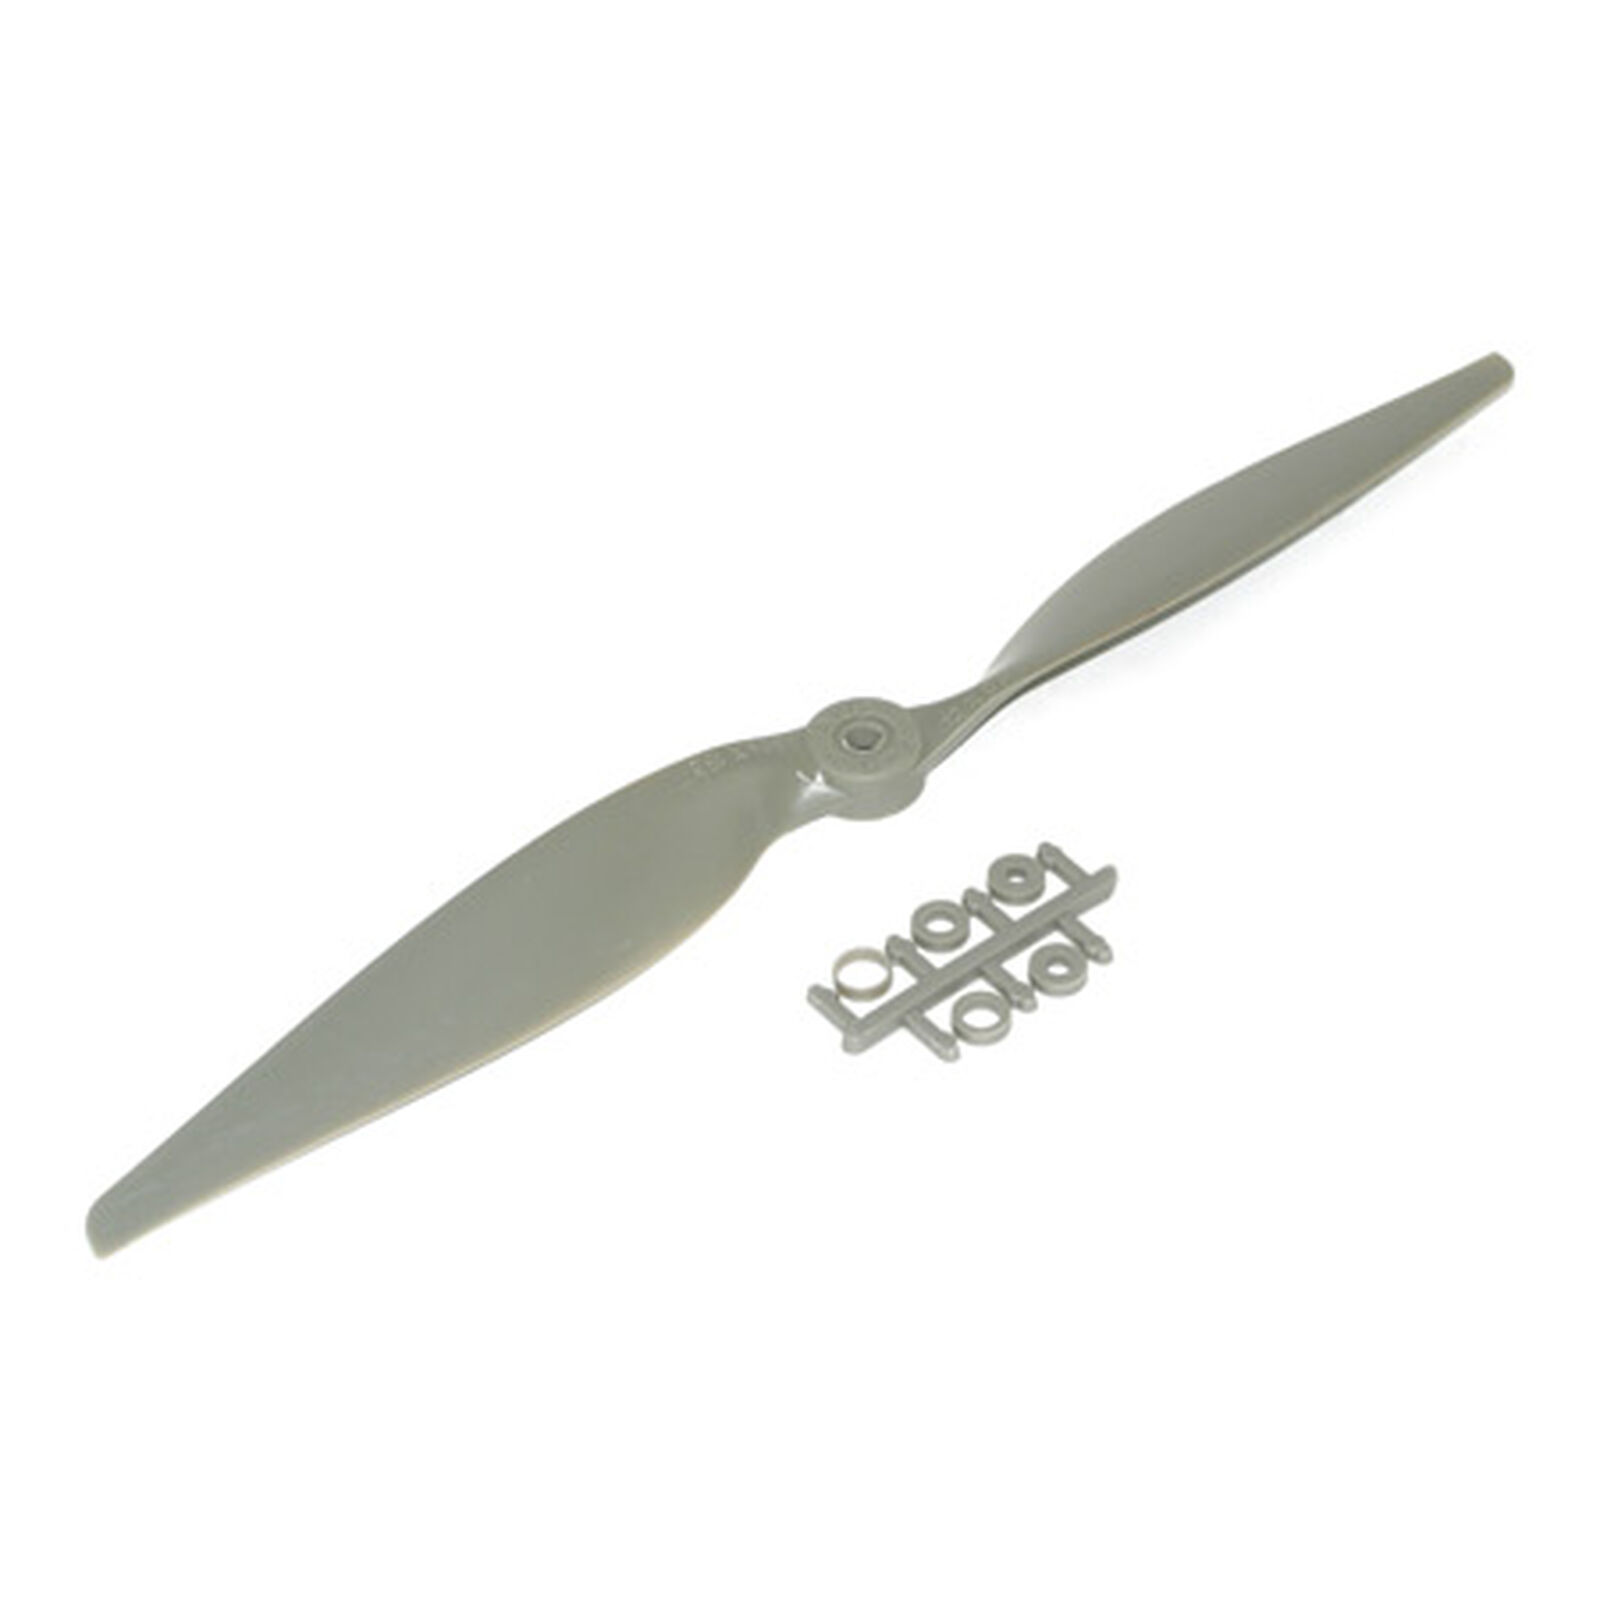 Thin Electric Pusher Propeller, 12 x 6EP